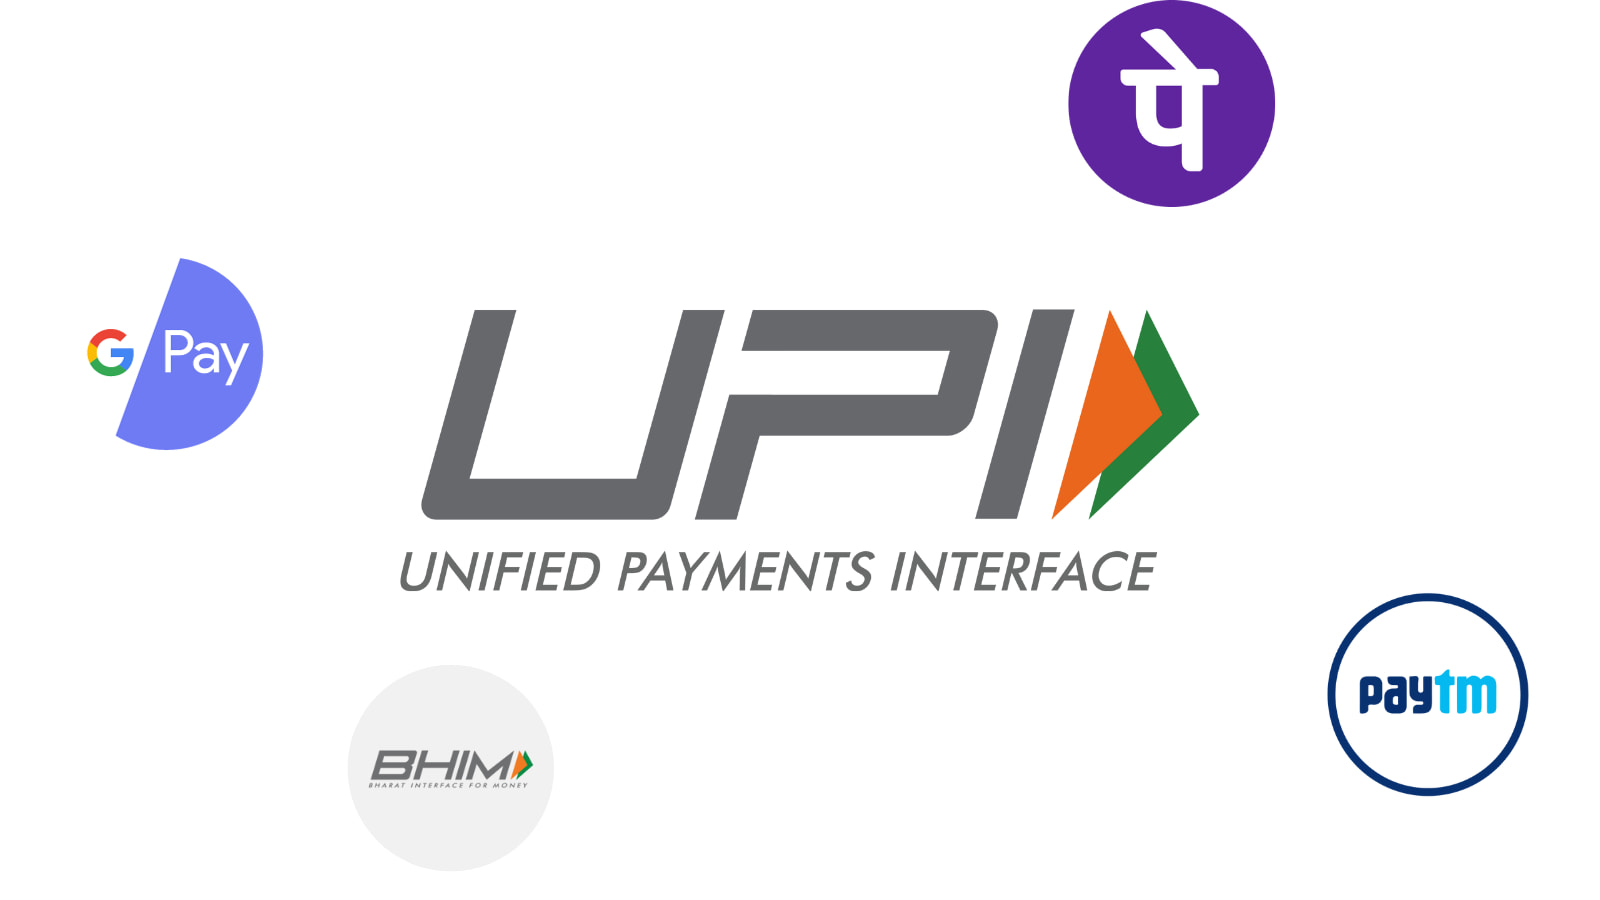 Inactive UPI IDs Face Deactivation by Year-End